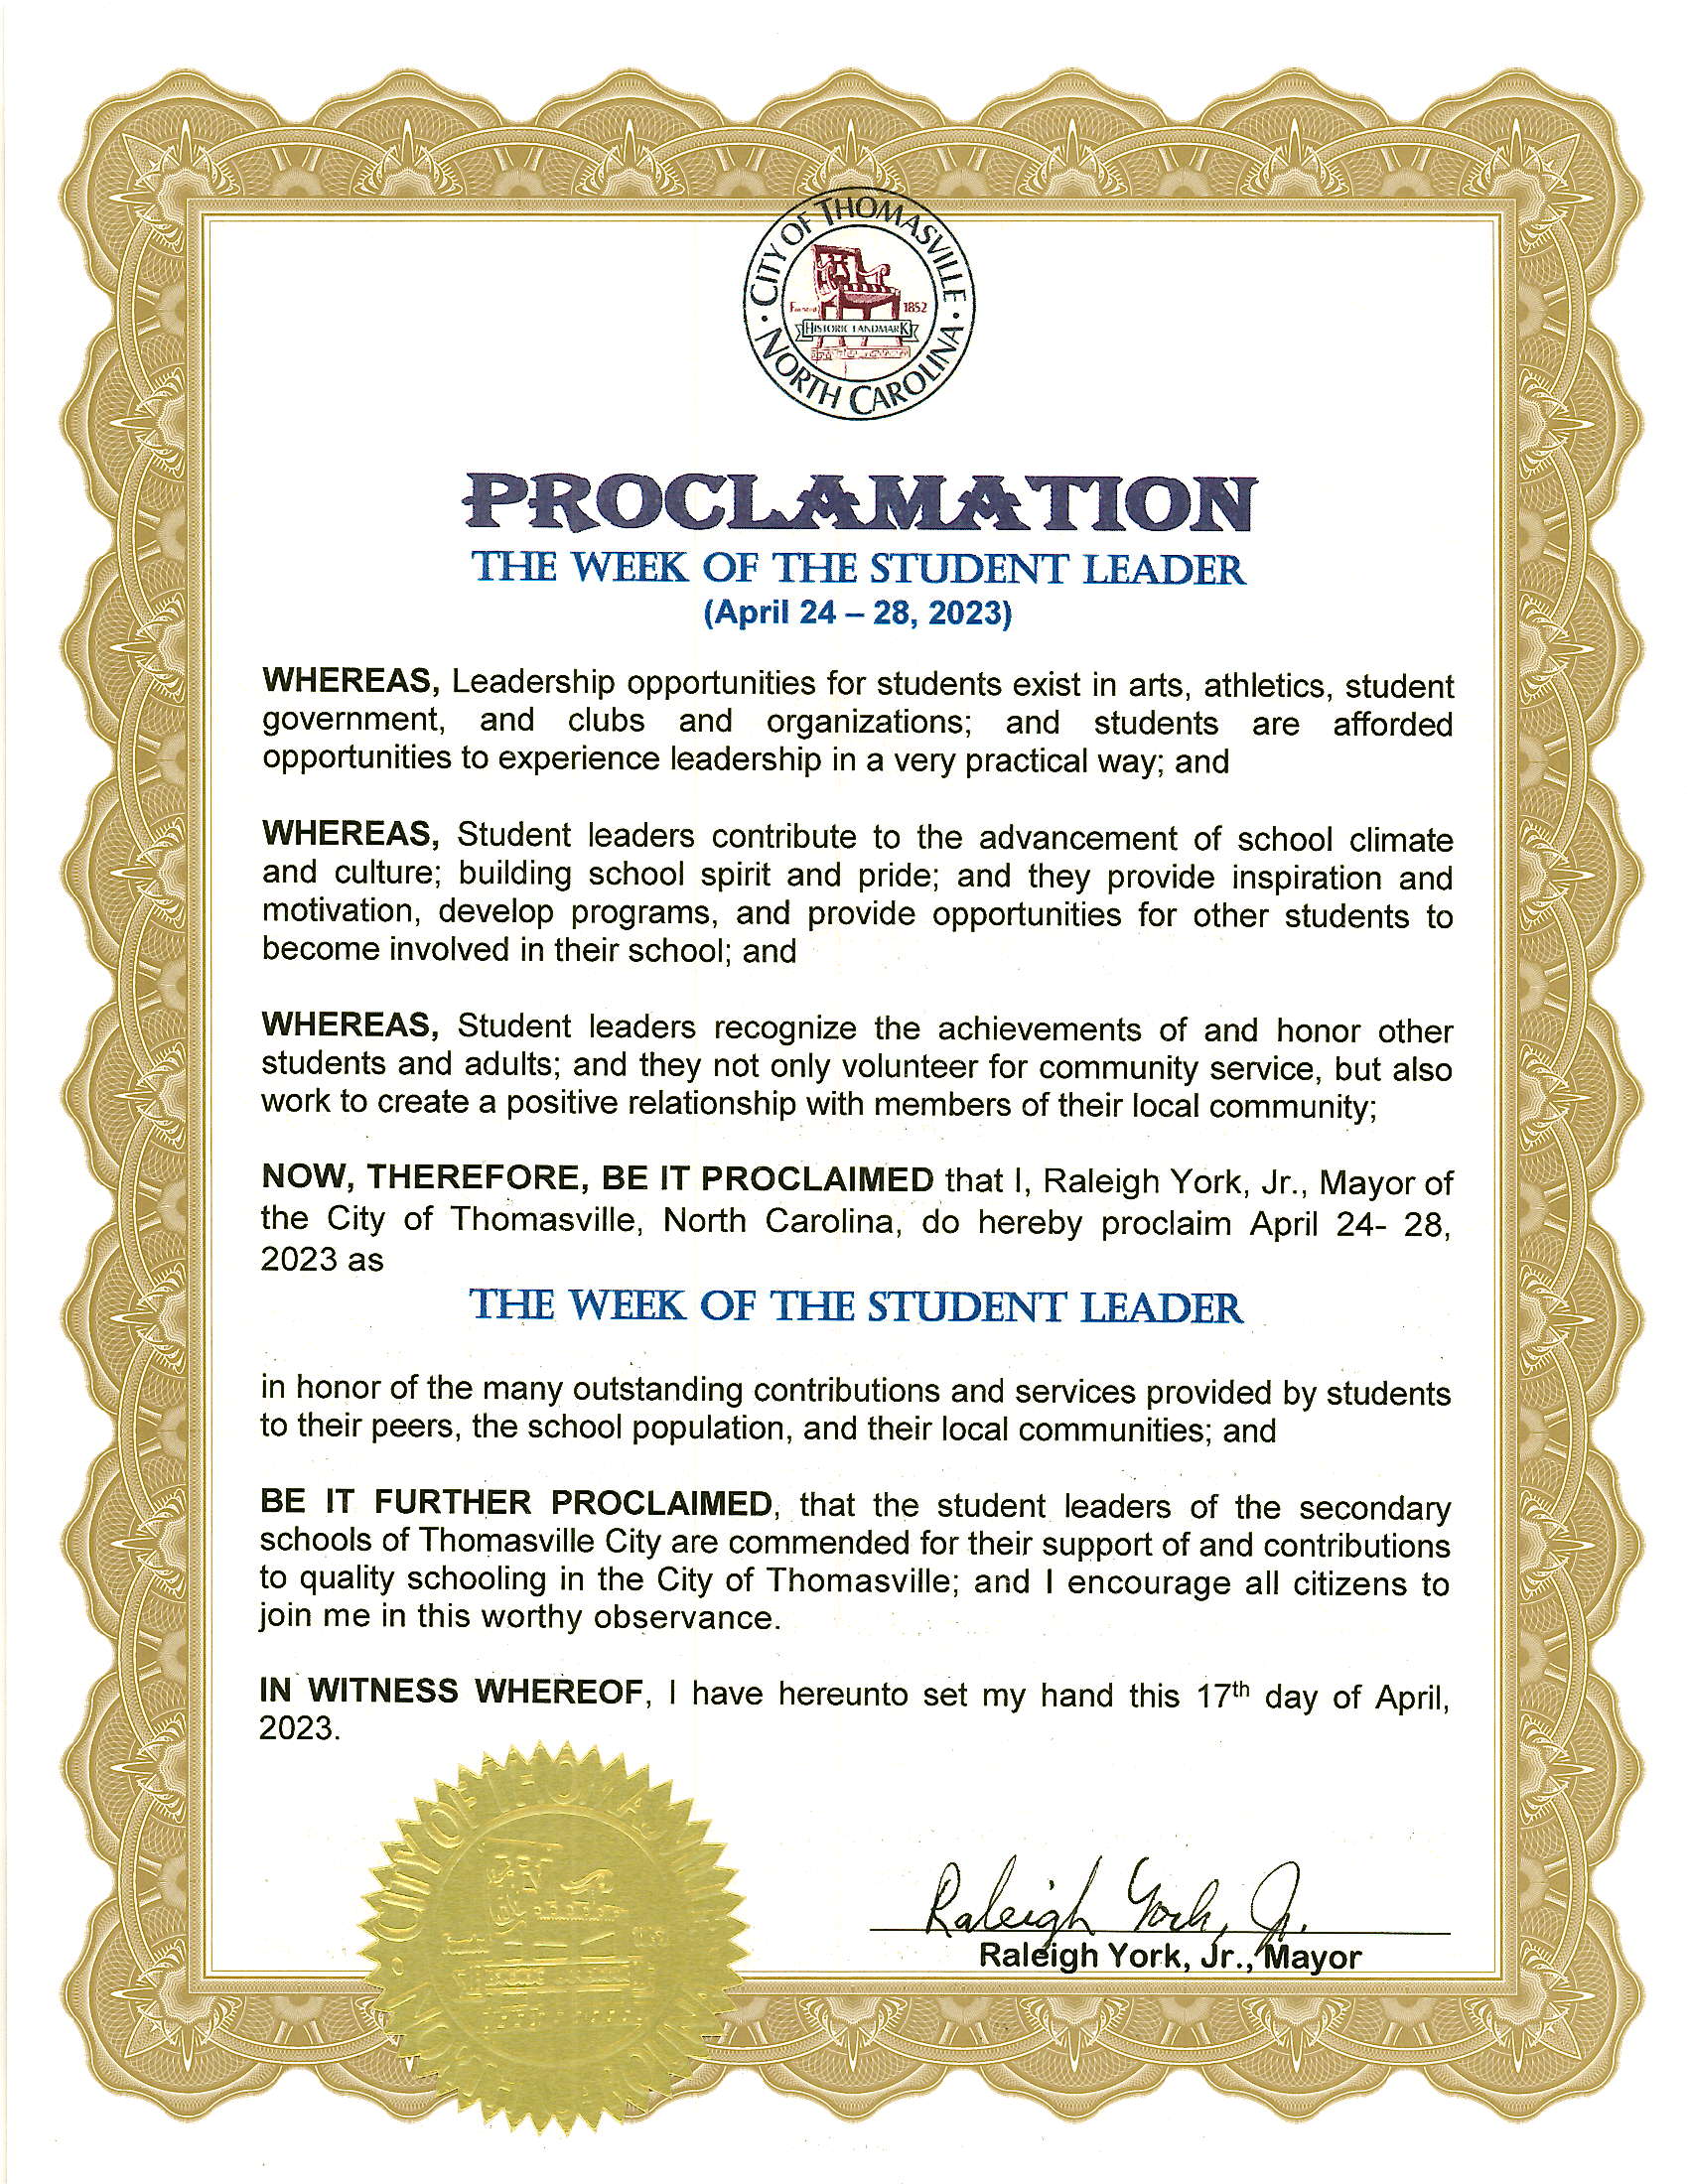 Proclamation - The Week of the Student Leader - April 24 - 28, 2023